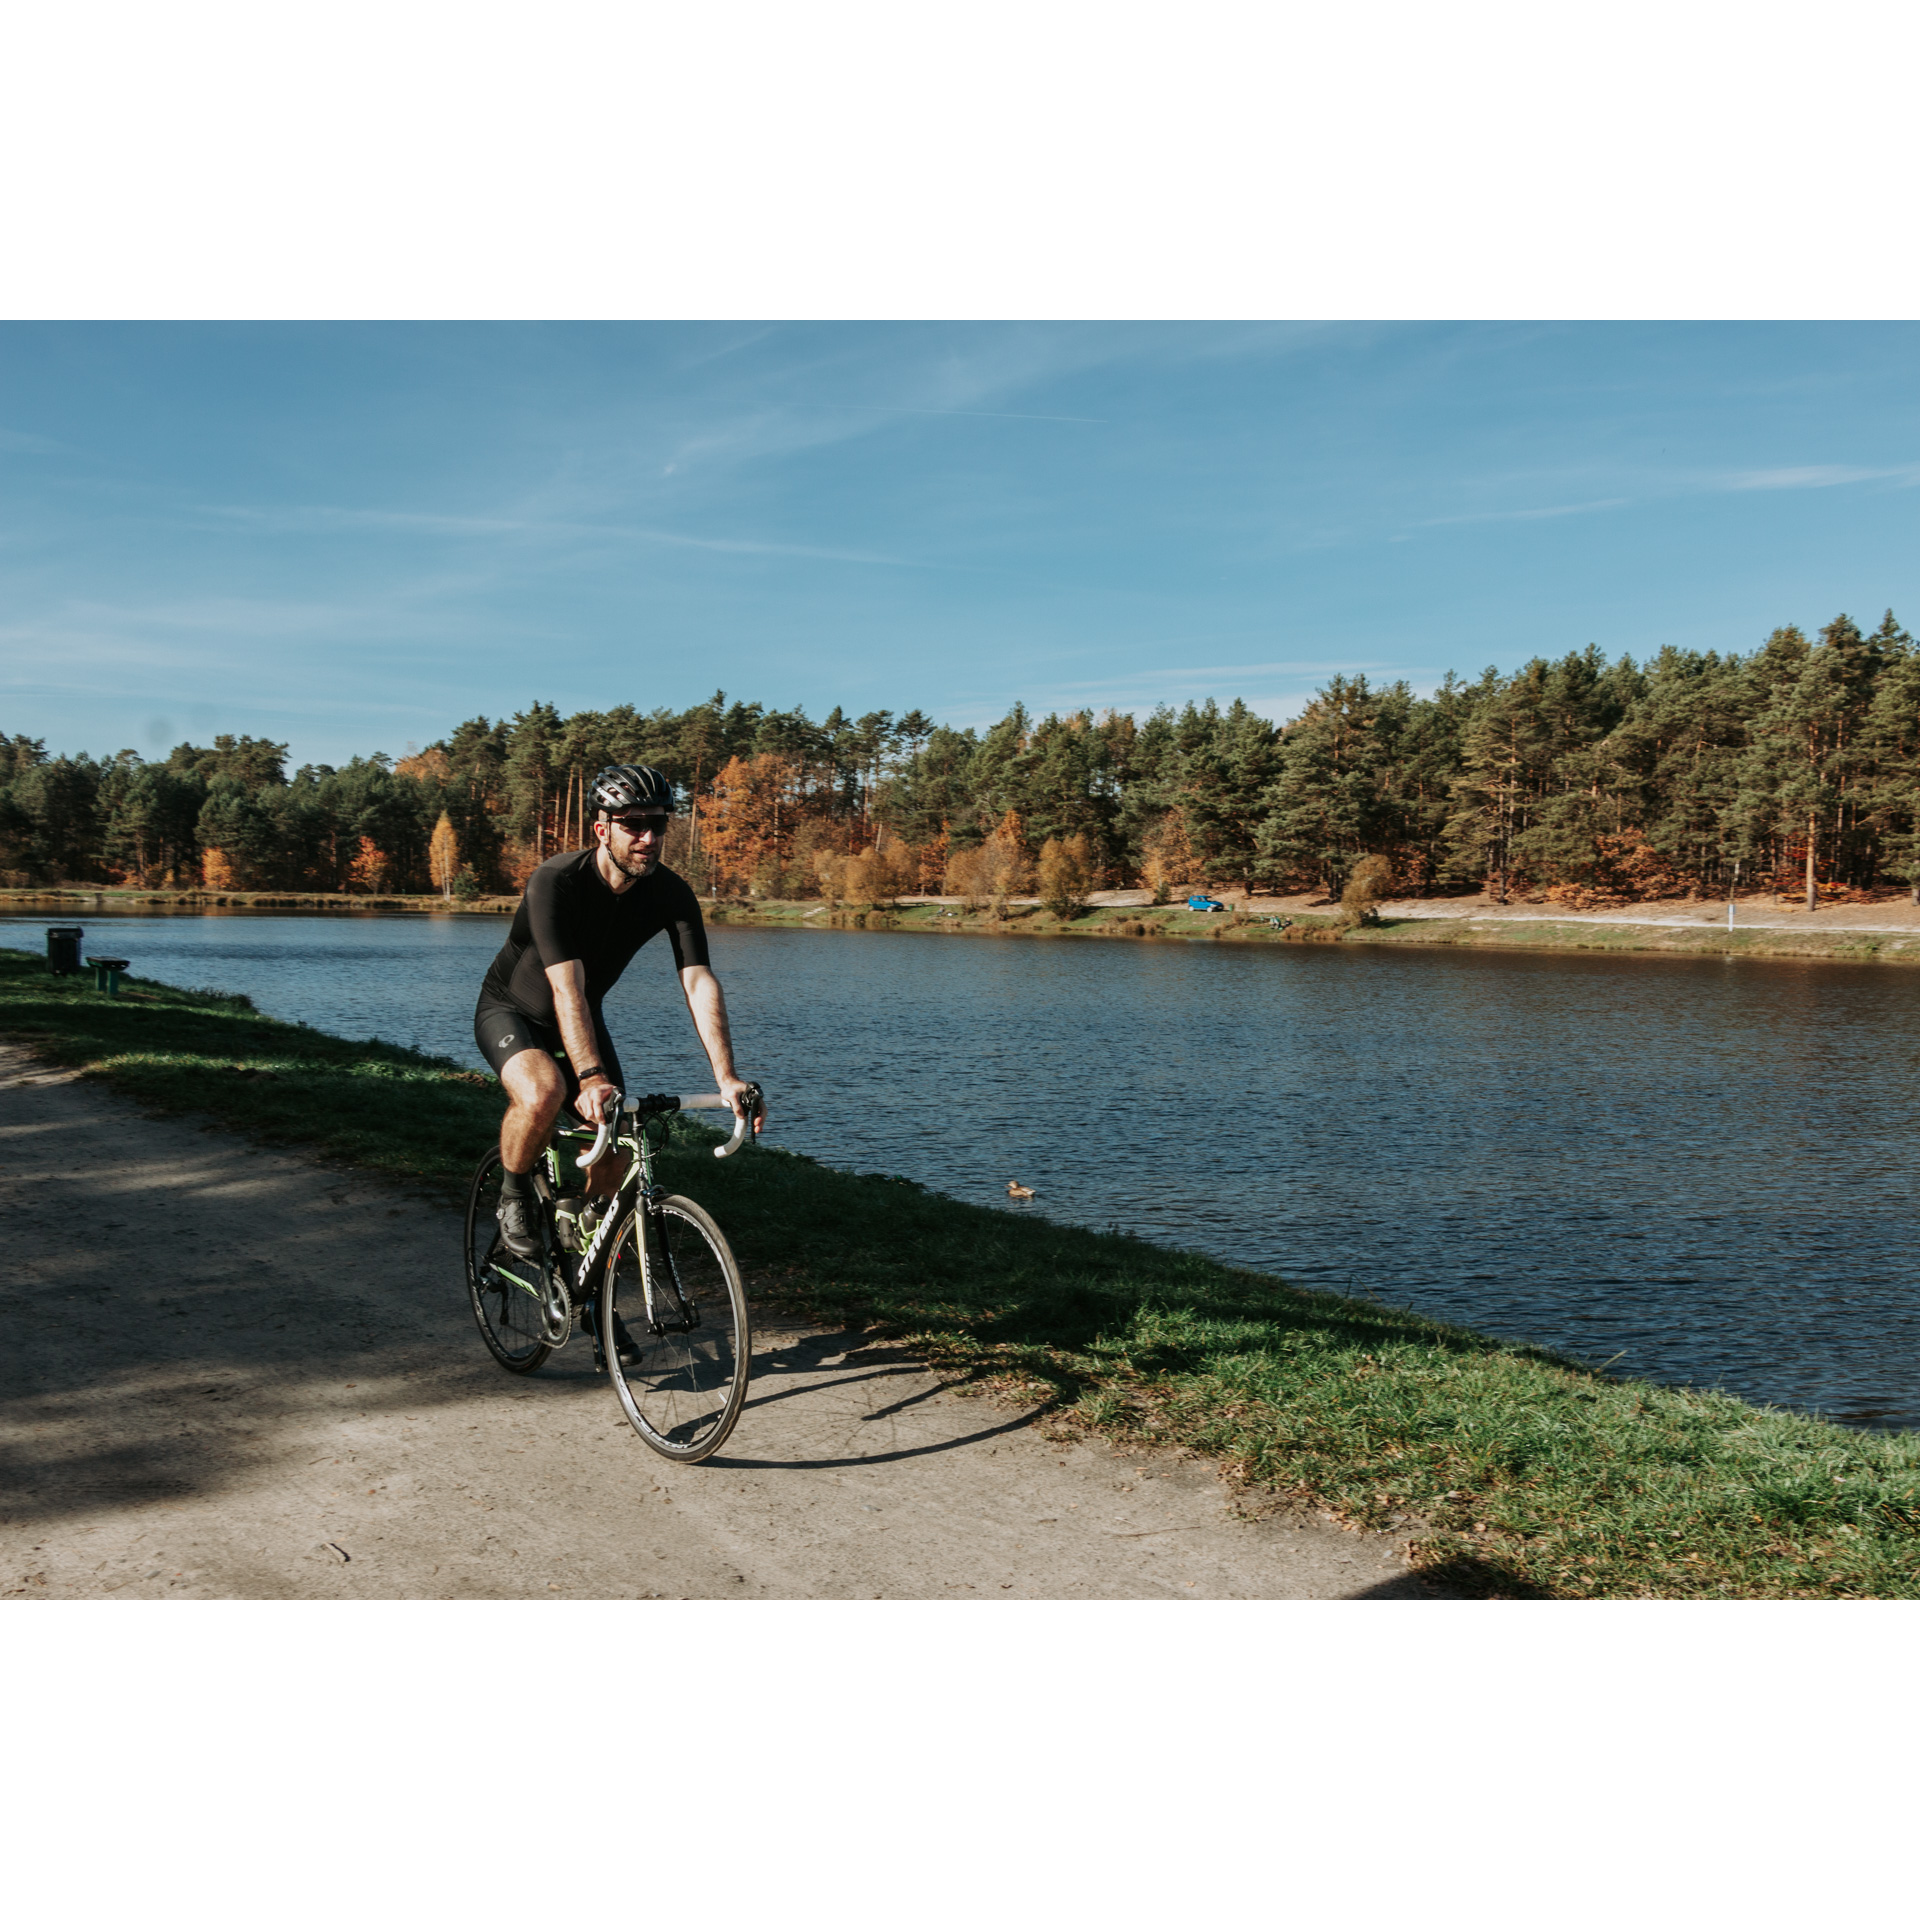 A cyclist in a black outfit and a helmet riding on a road along a river with a forested shore